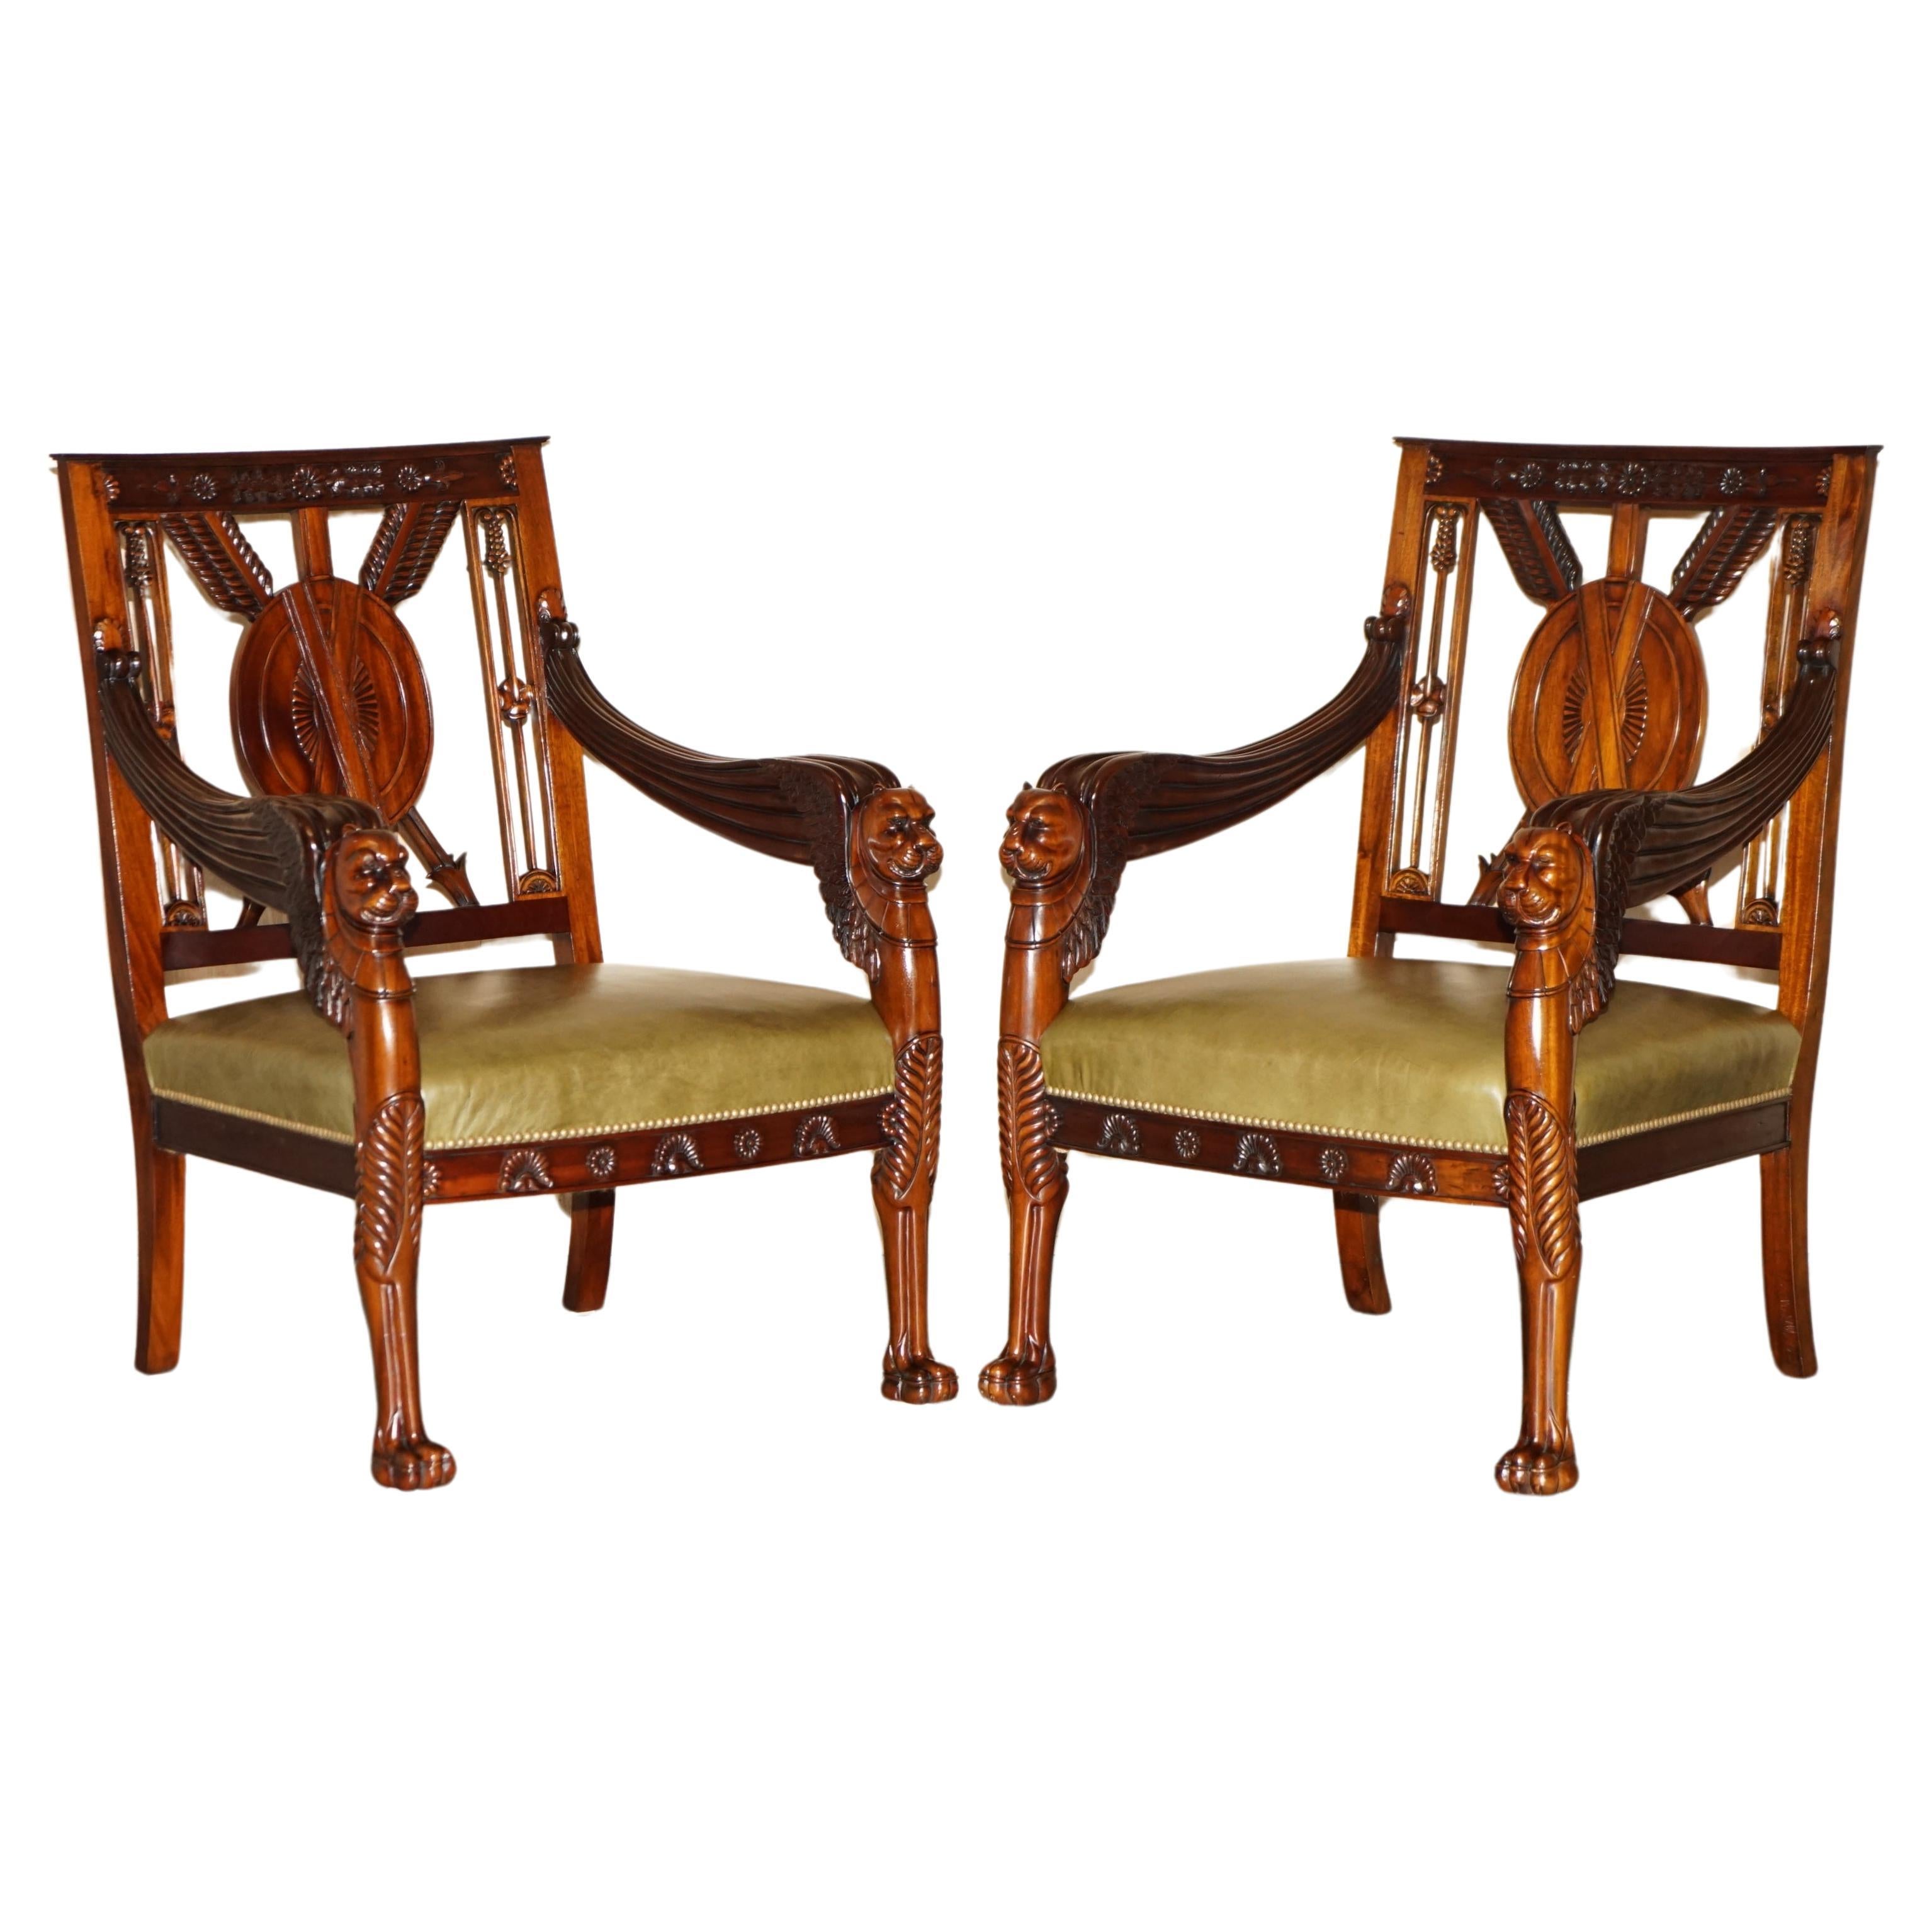 EXQUISITE PAIR OF HAND CARVED HARDWOOD LiBRARY ARMCHAIRS LION GRIFFON WING ARMS For Sale